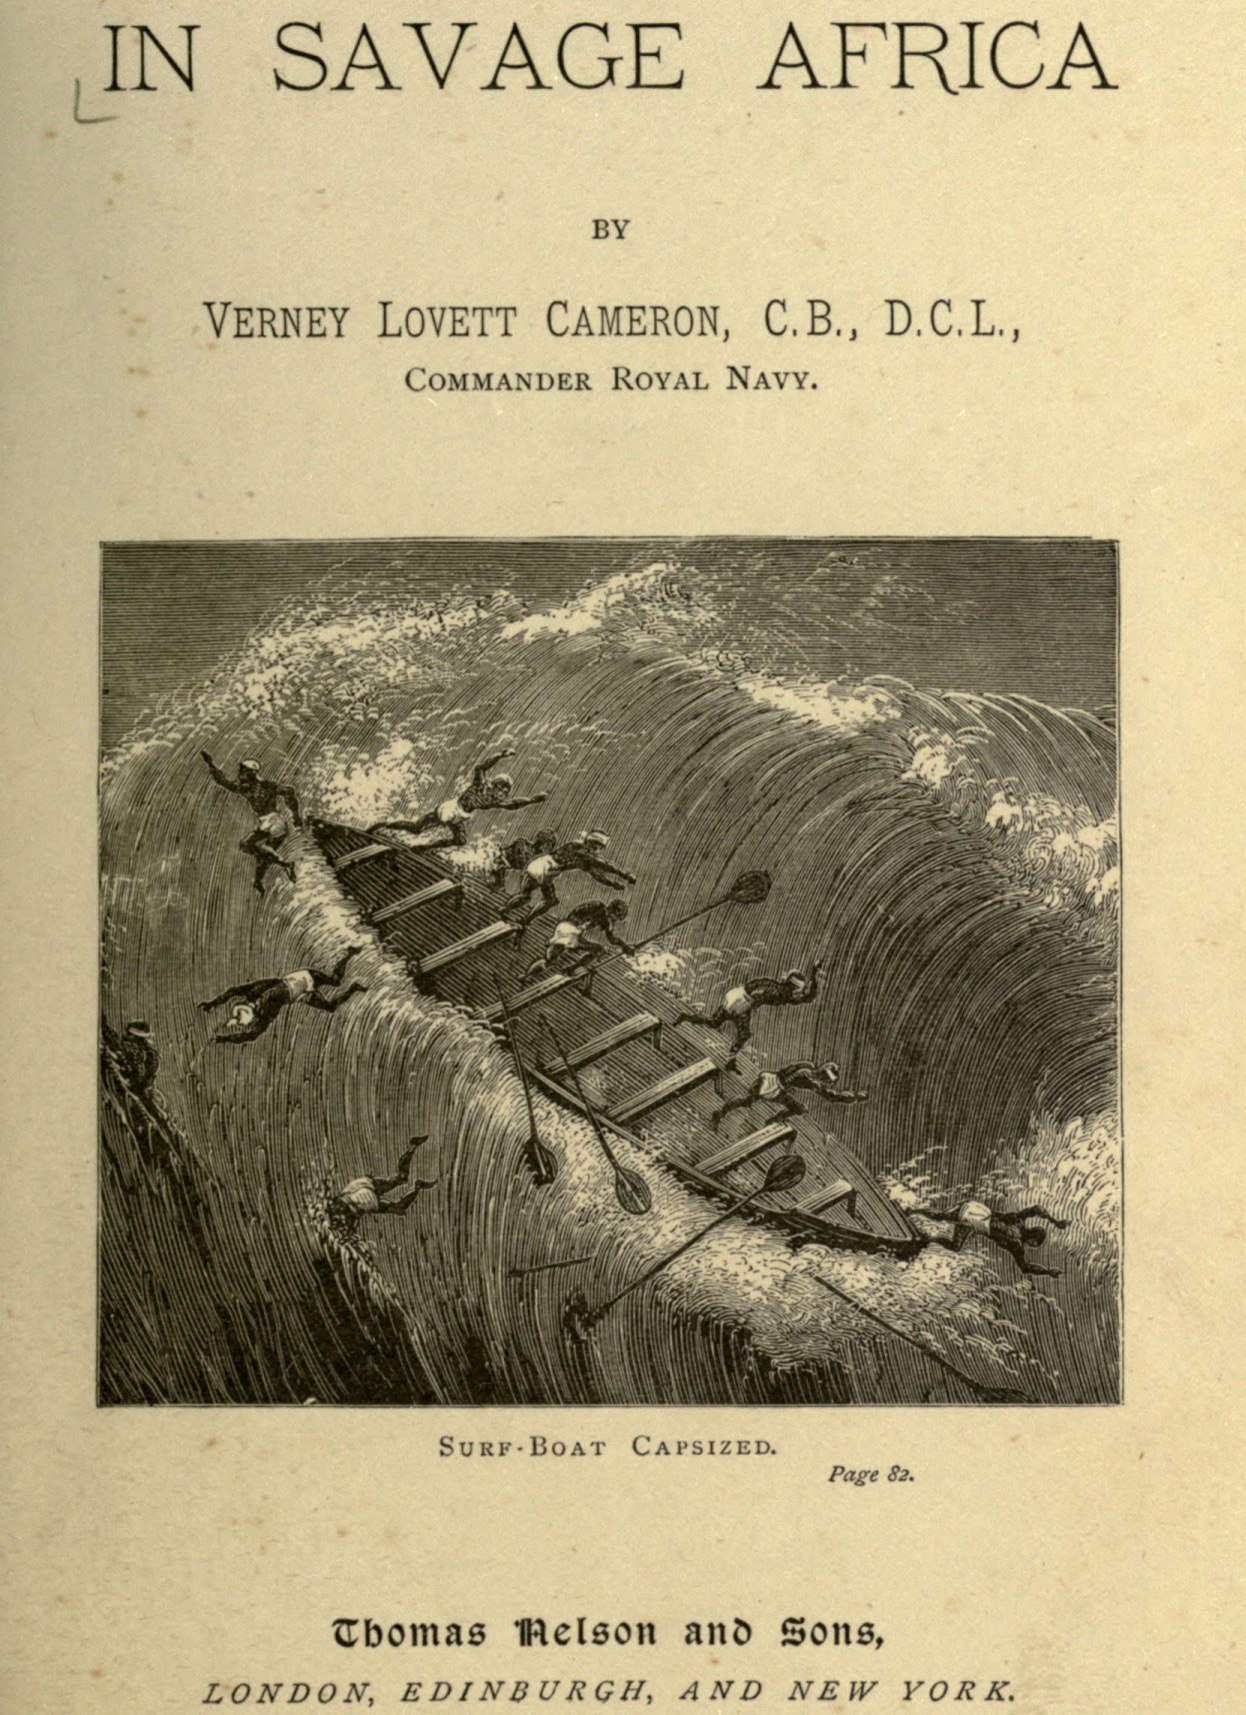 Cameron, Verney Lovett (1887) In Savage Africa, or, The Adventures of Frank Baldwin from the Gold Coast to Zanzibar. T. Nelson and Sons, pp 82.